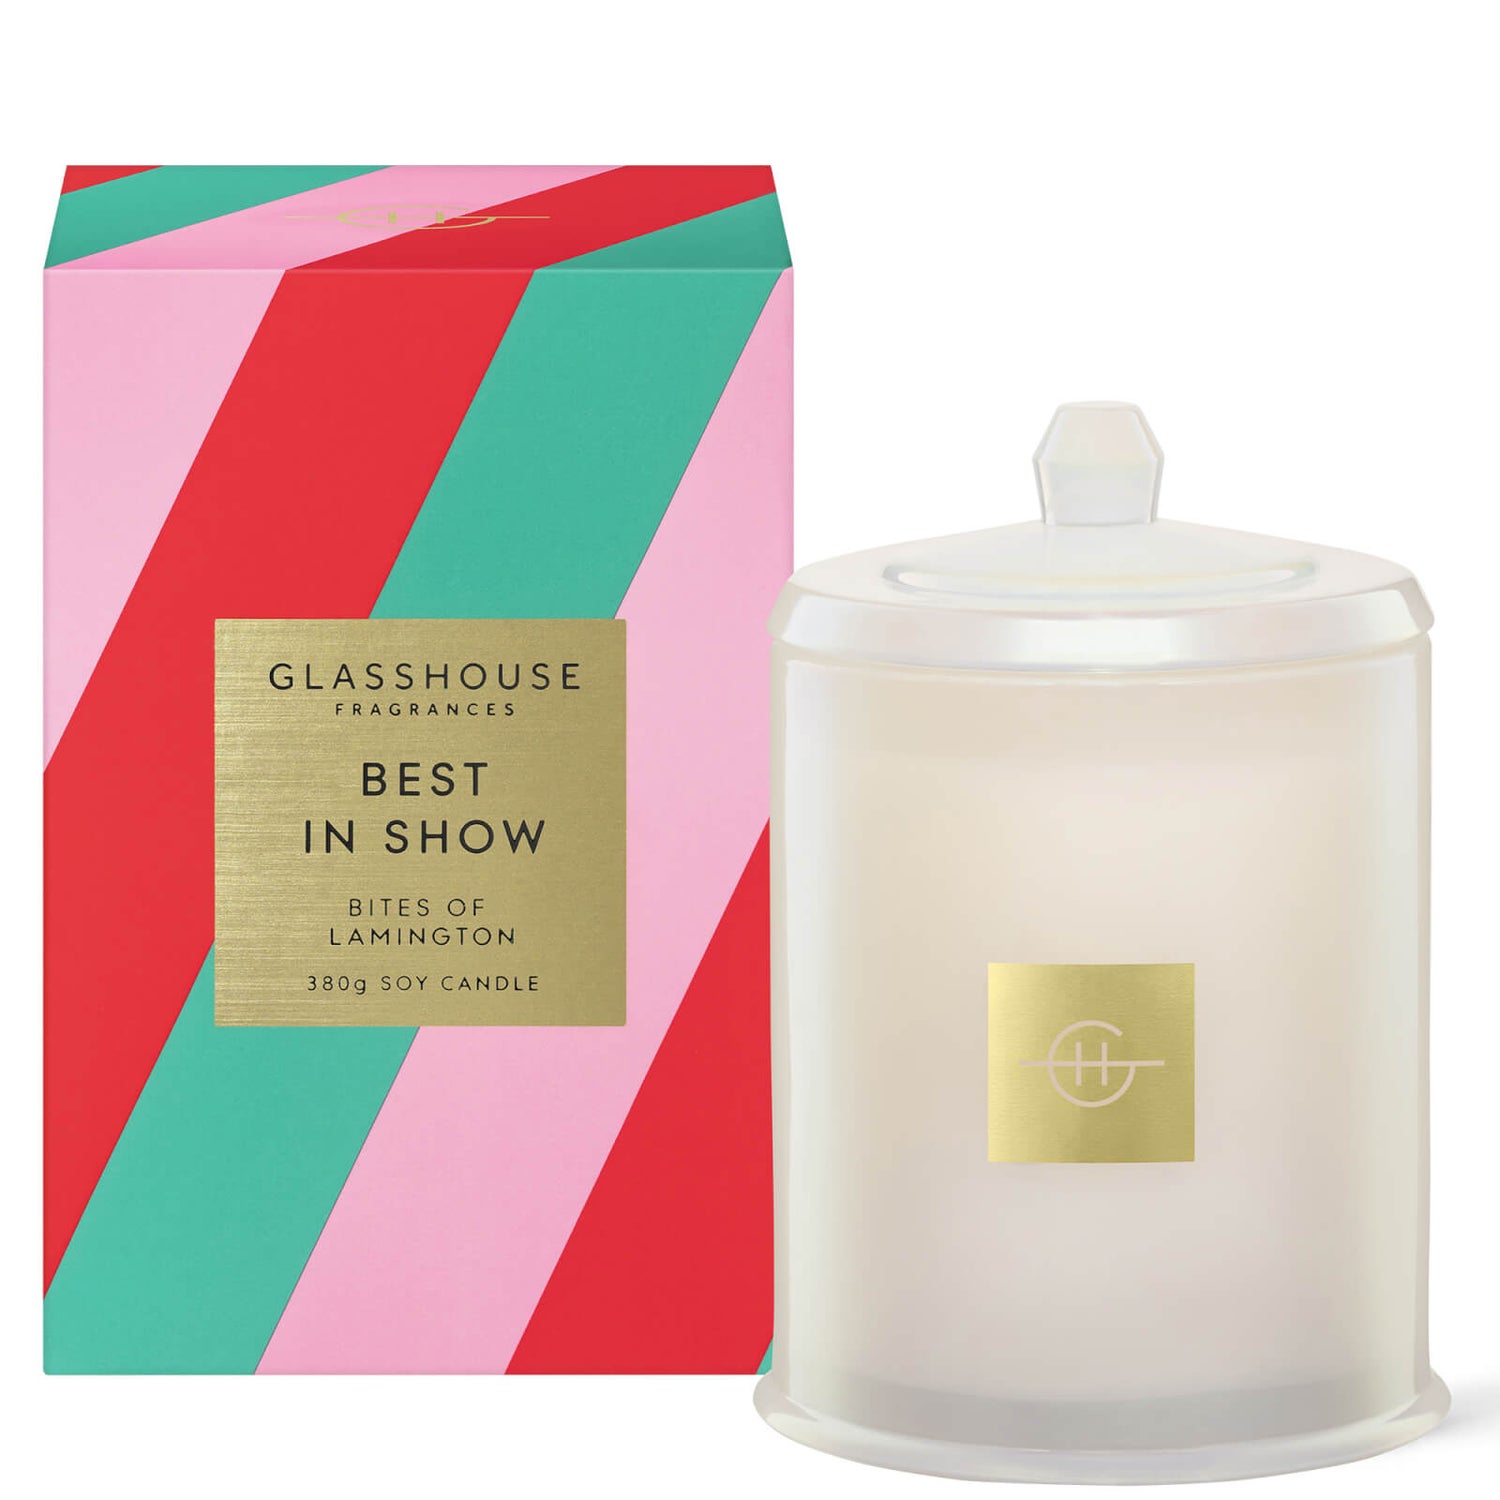 Glasshouse Fragrances Home Fragrance Best in Show Candle 380g